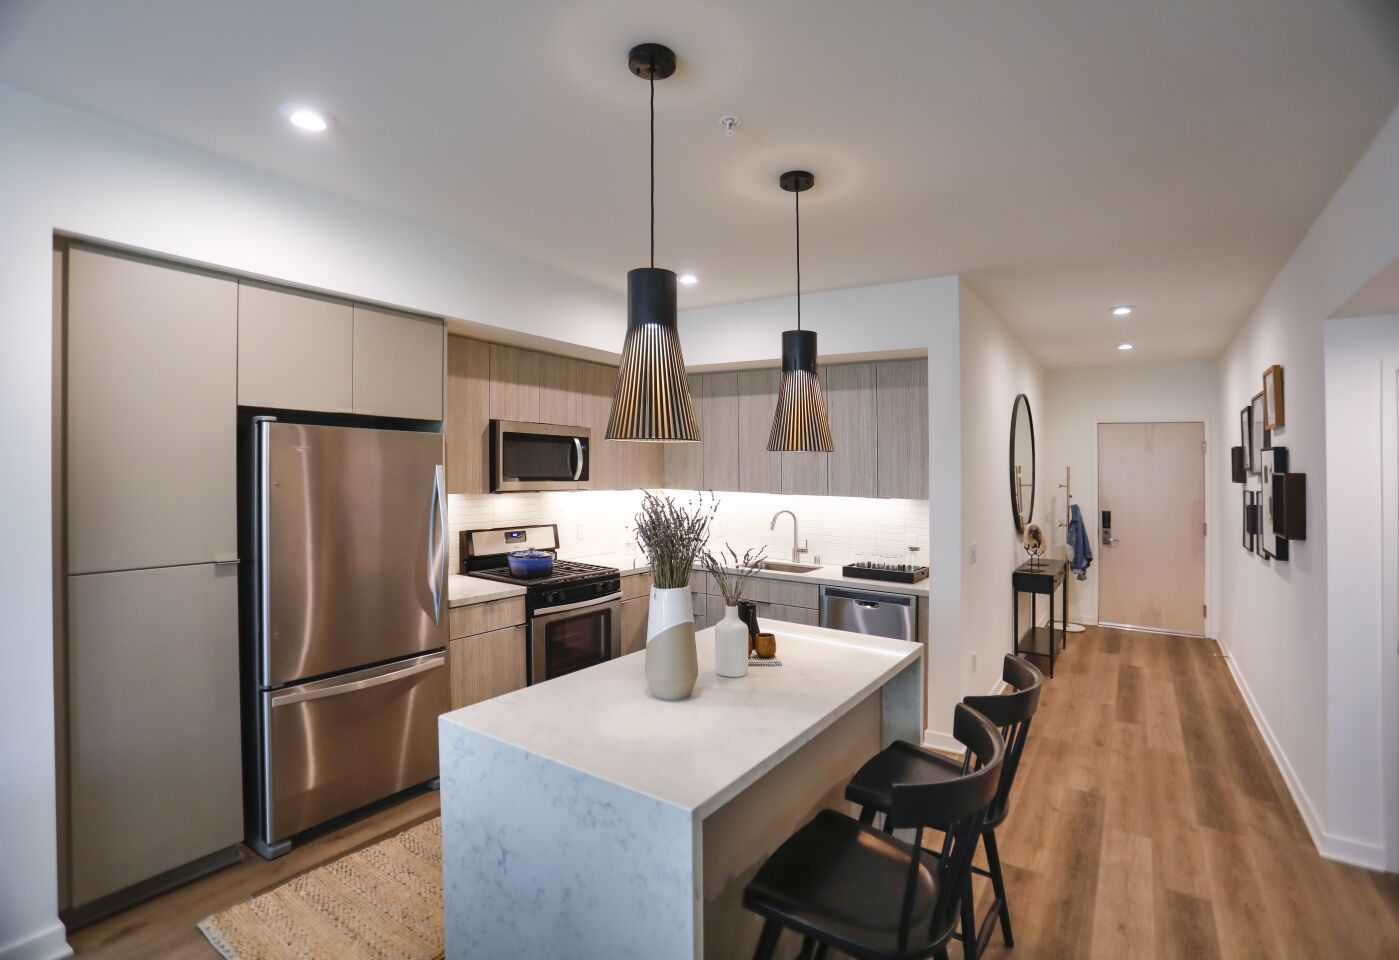 A two-bedroom, two-bath, 1,058 sq. ft. apartment starts at about $3,700 per month at One Paseo, the upscale development in Carmel Valley, part of the 23-acre mixed-use project. Photographed October 8, 2019, in San Diego, California.